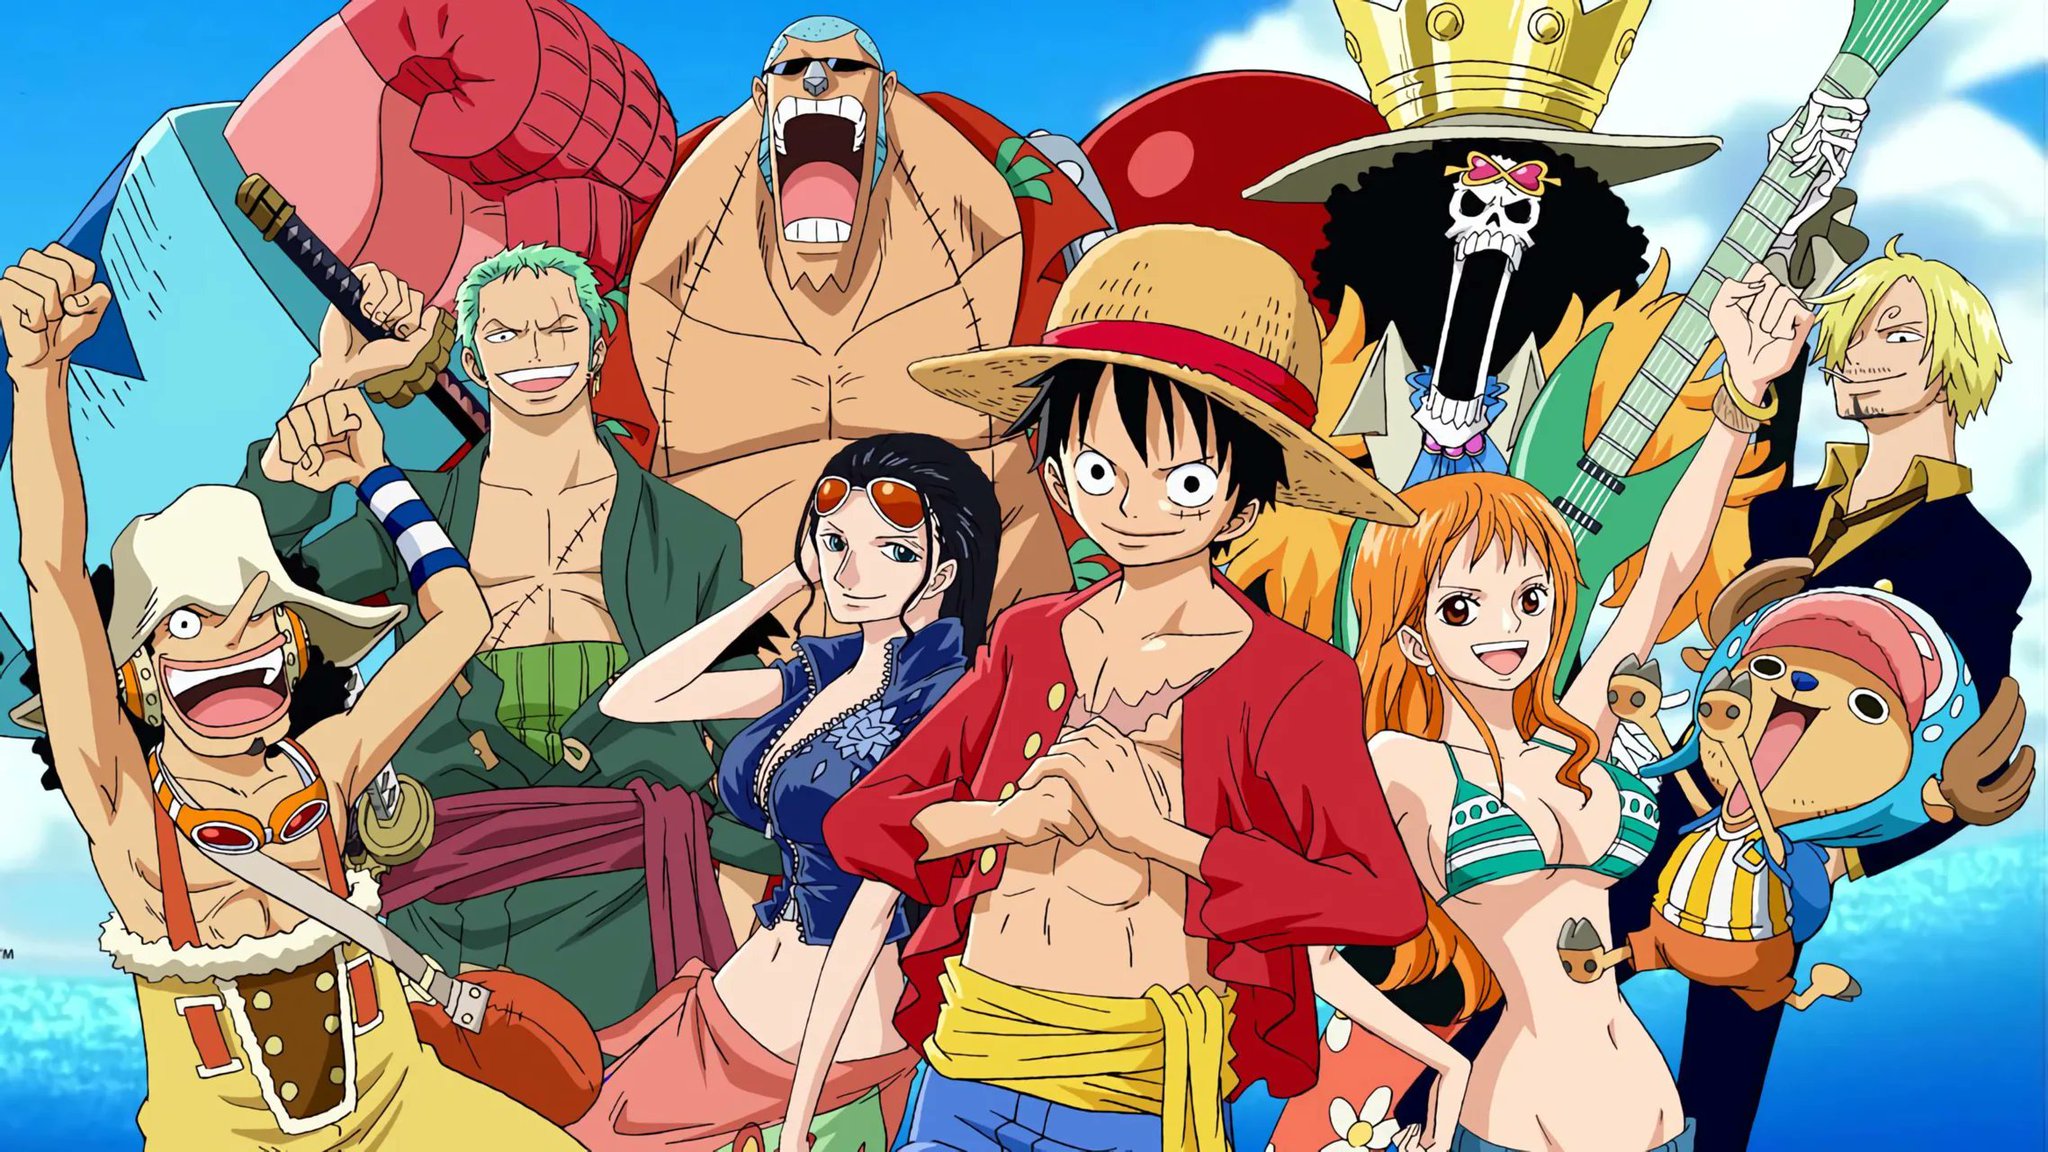 One Piece' Anime Seasons Leaving Netflix in February 2023 - What's